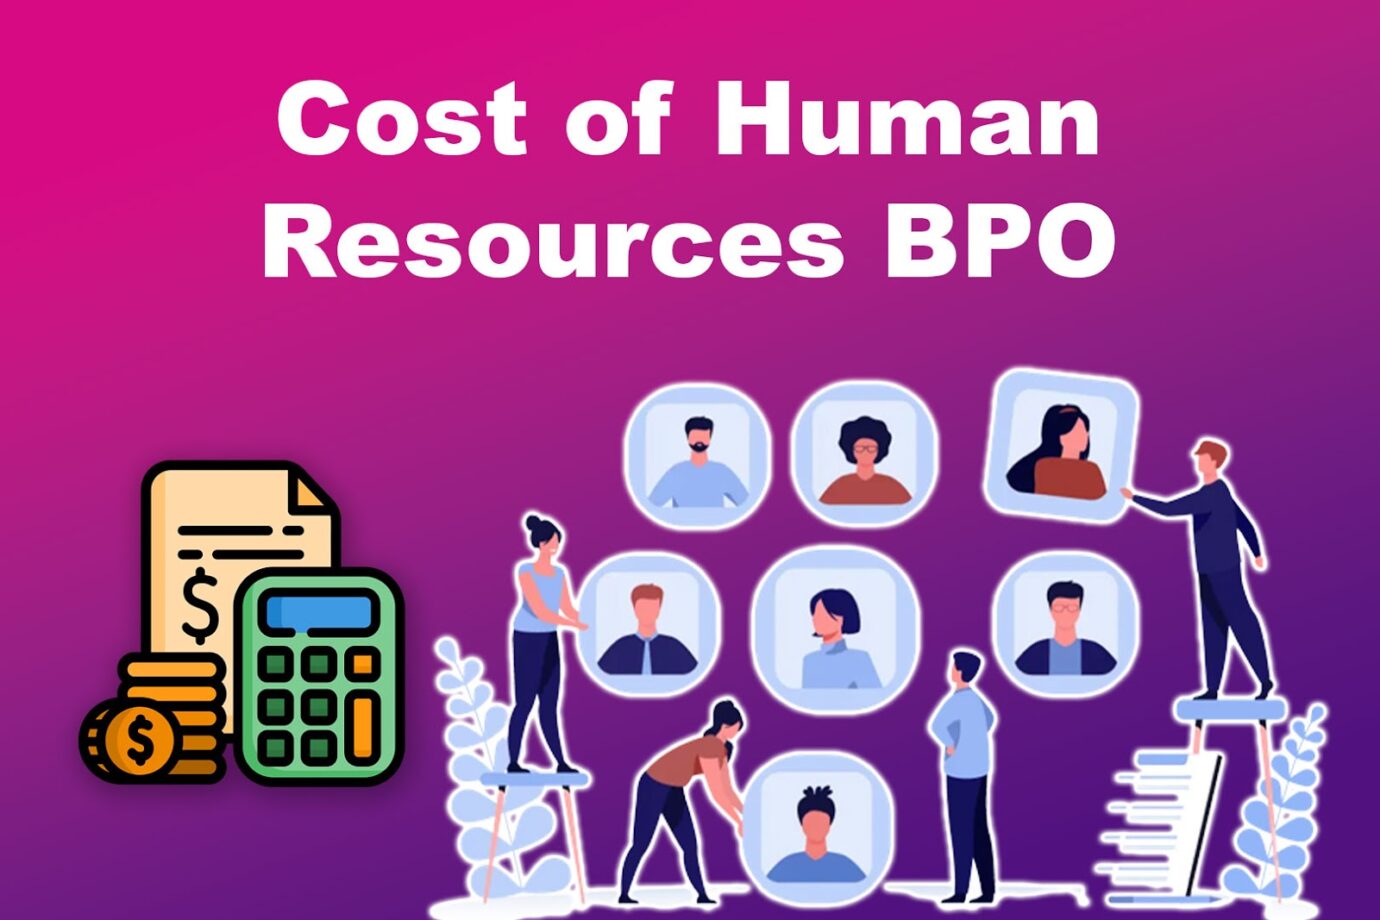 Cost of Human Resources BPO